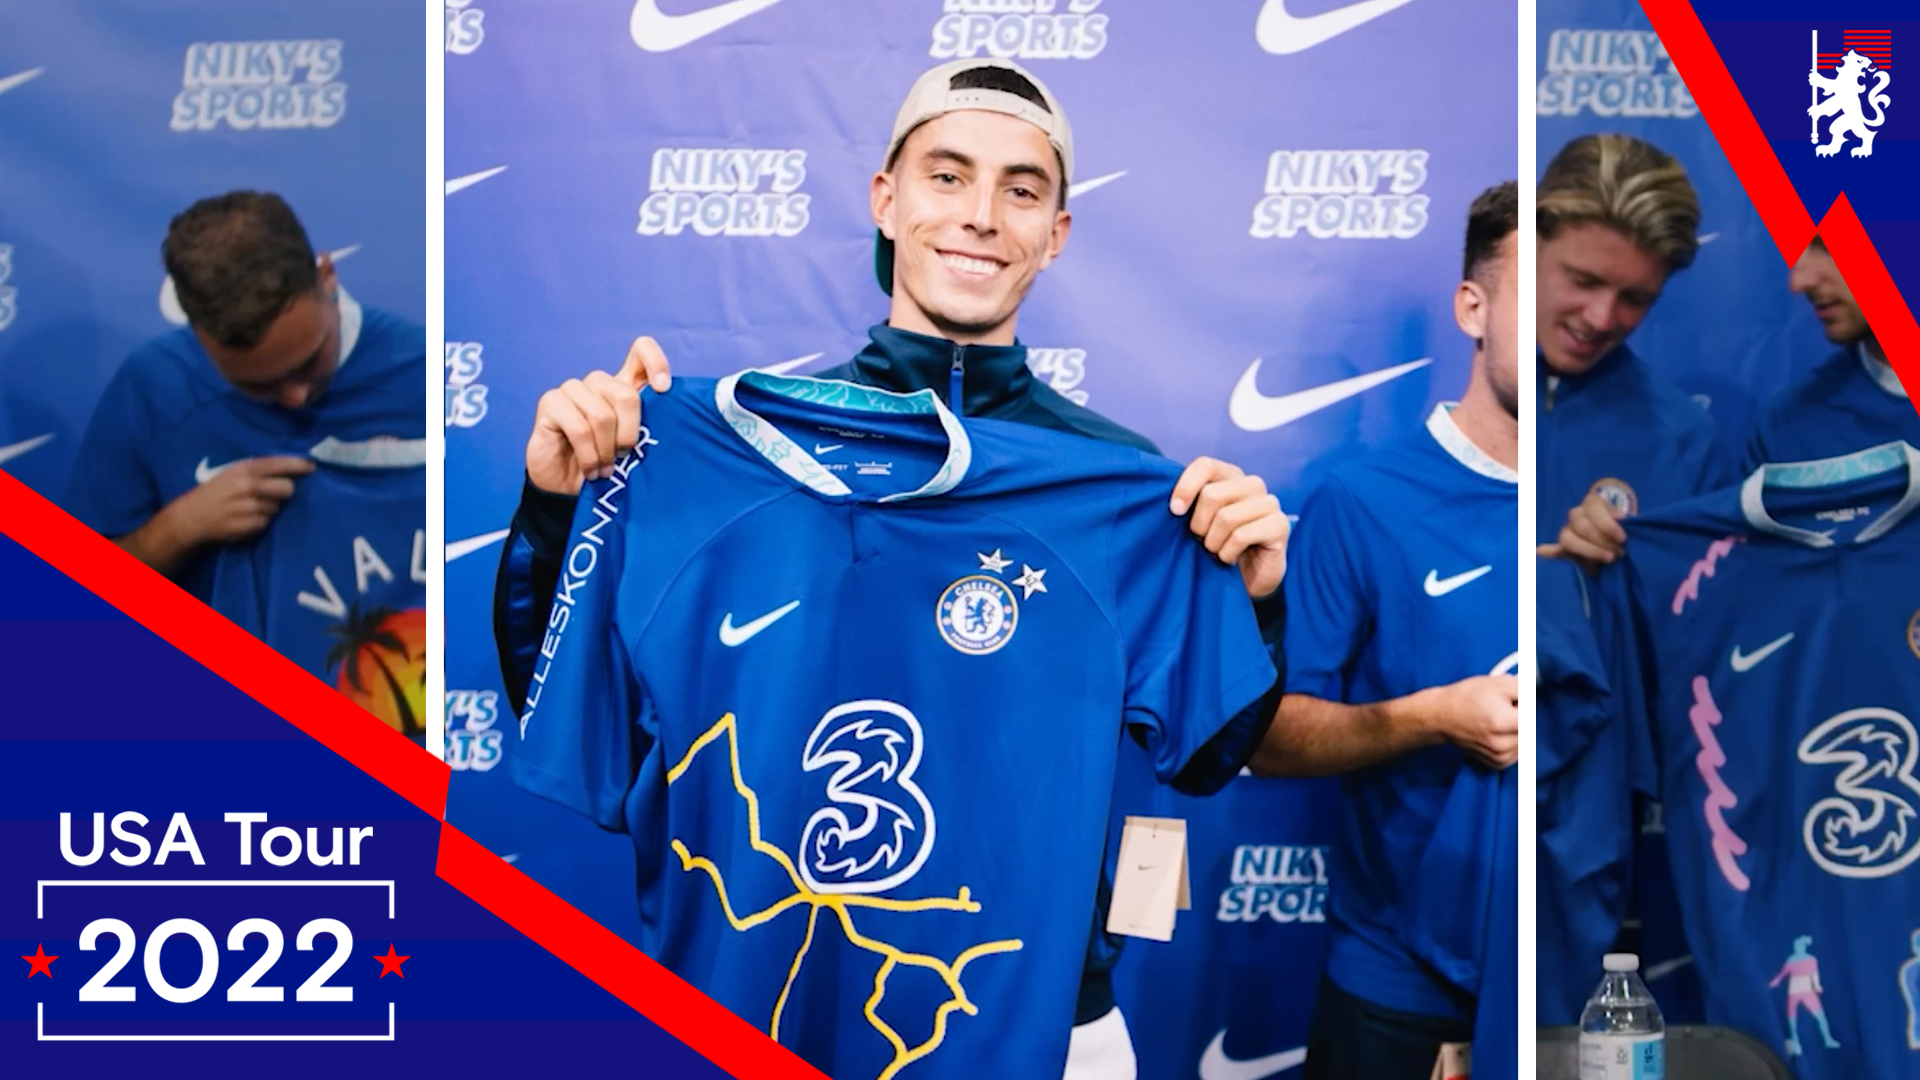 Custom shirts for Havertz, Mount, James & Gallagher 😍, Niky's Sports x  Nike, Video, Official Site